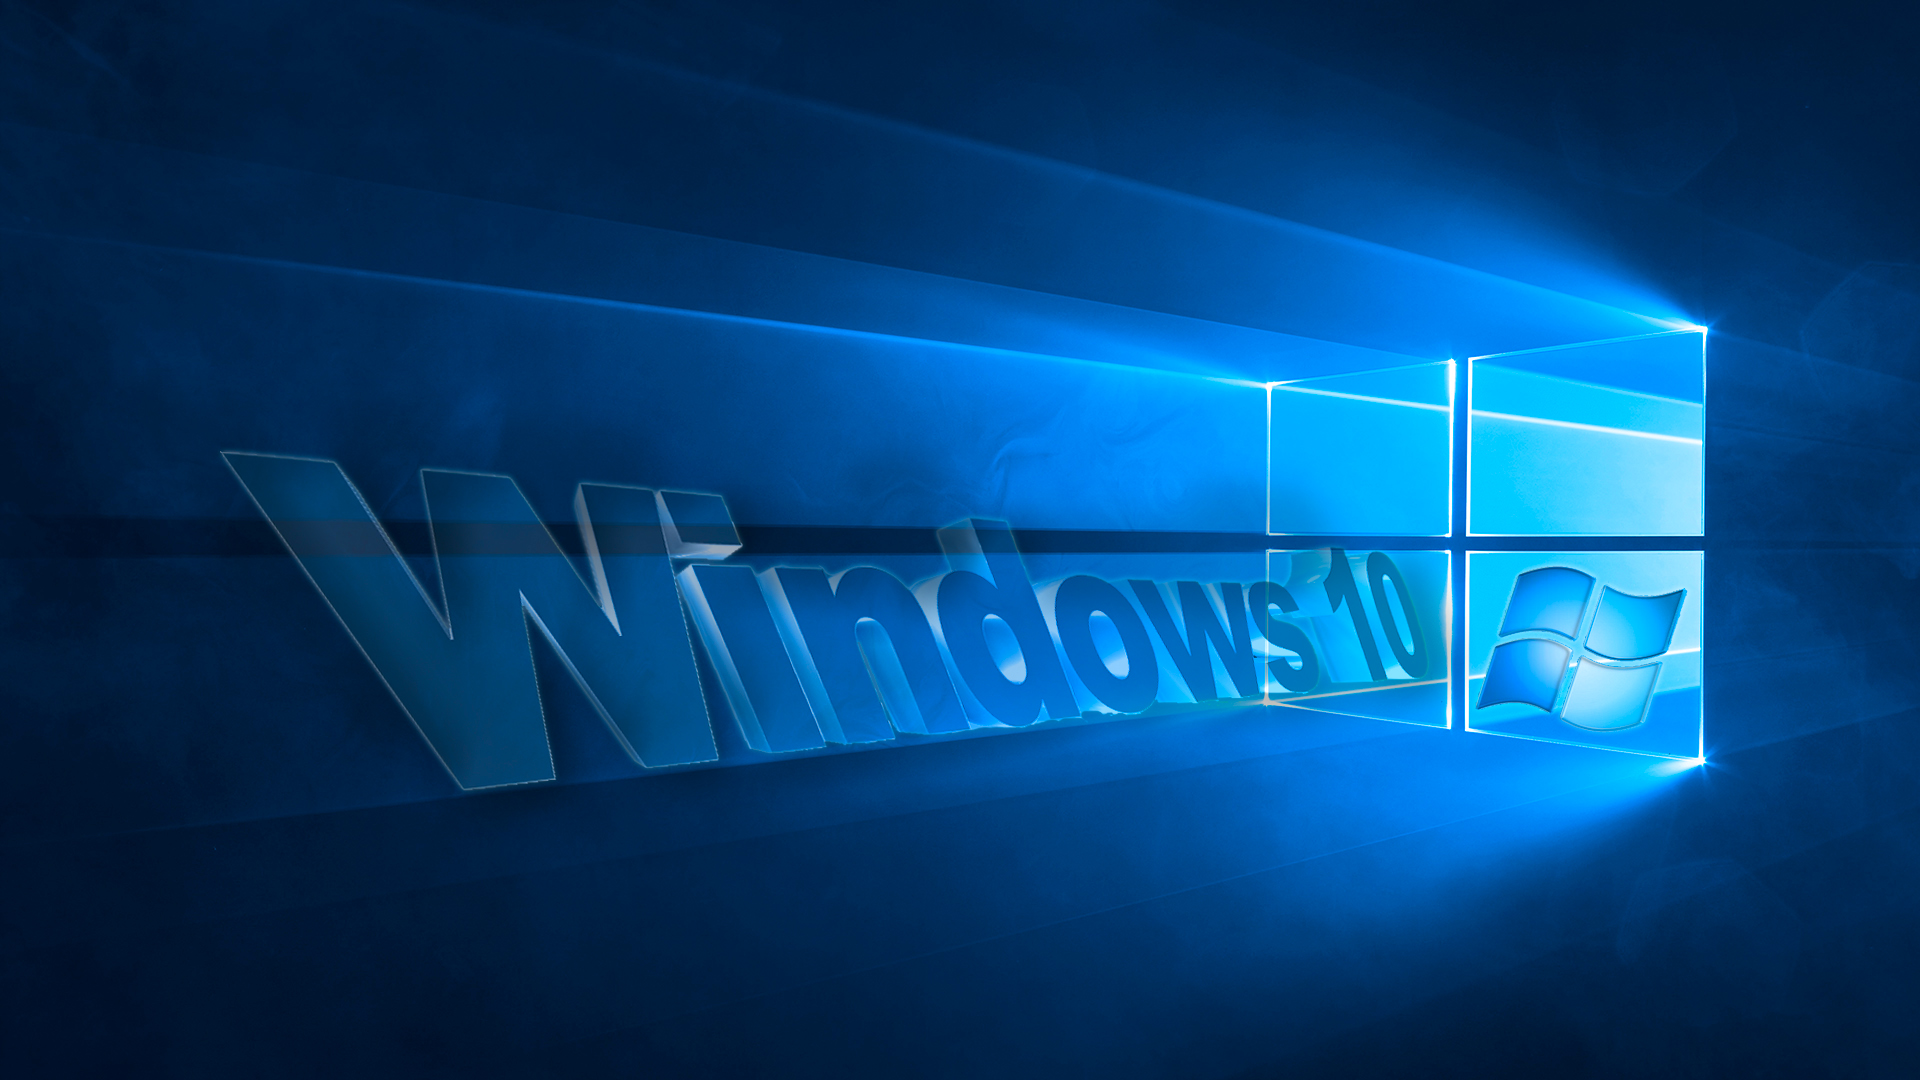 Free Download Windows 10 Hd Wallpapers Top Windows 10 Hd Backgrounds